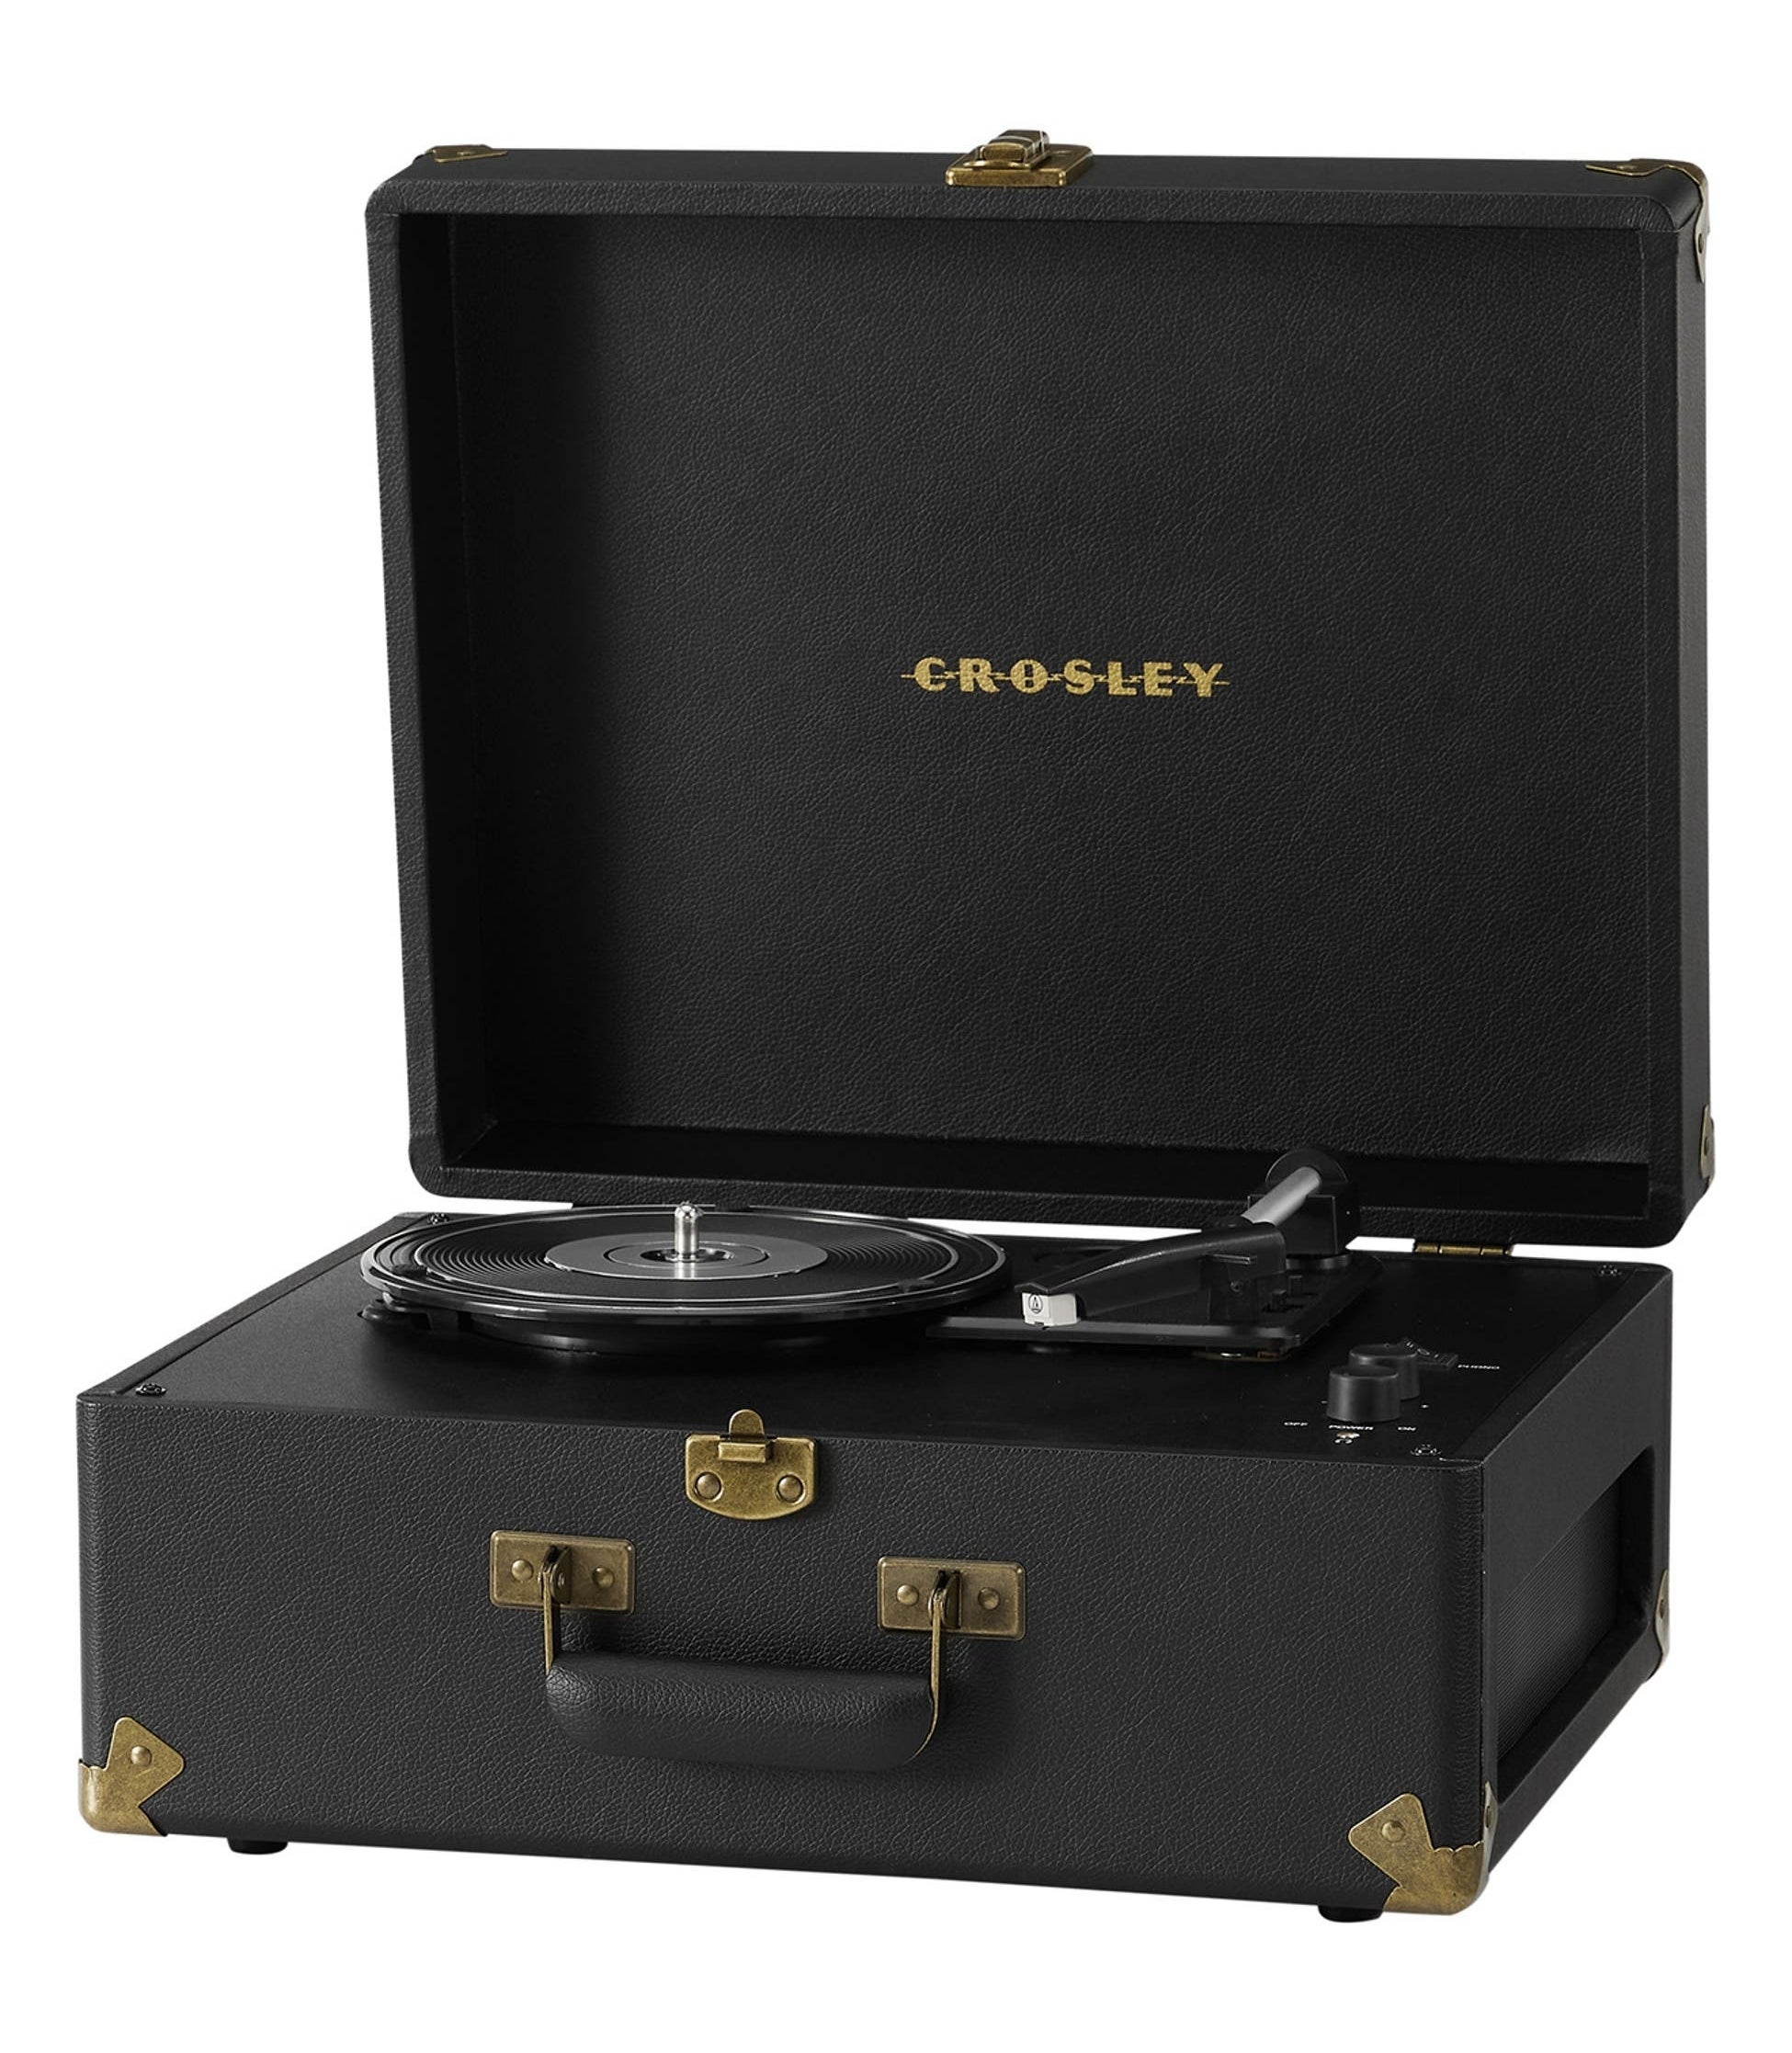 the black record player